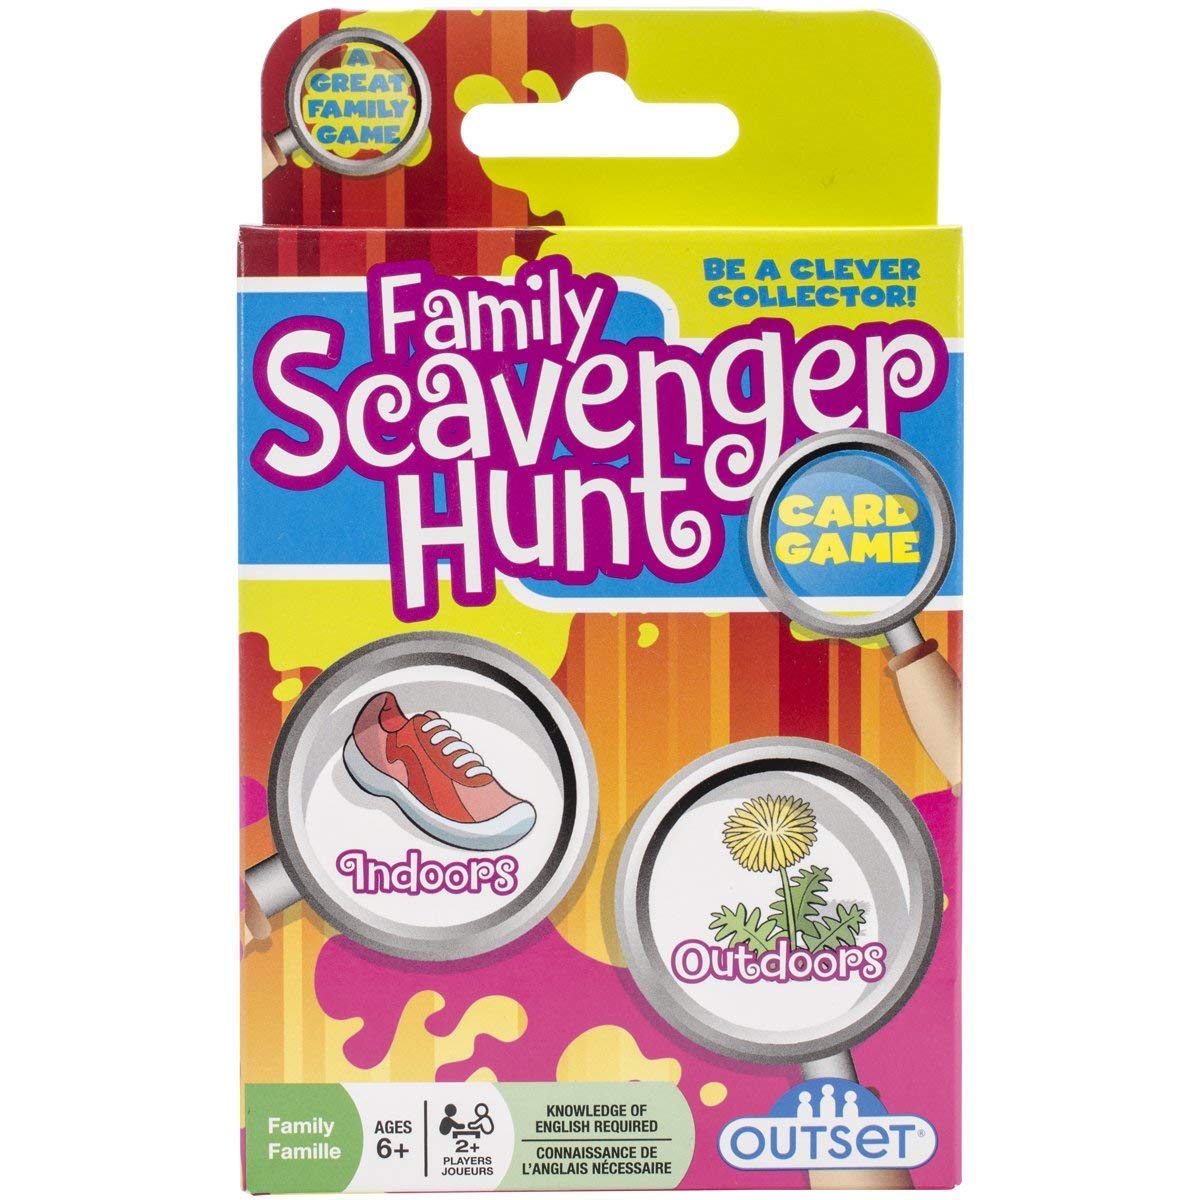 Family Scavenger Hunt Card Game by Outset Media for Travel Indoor and Outdoor